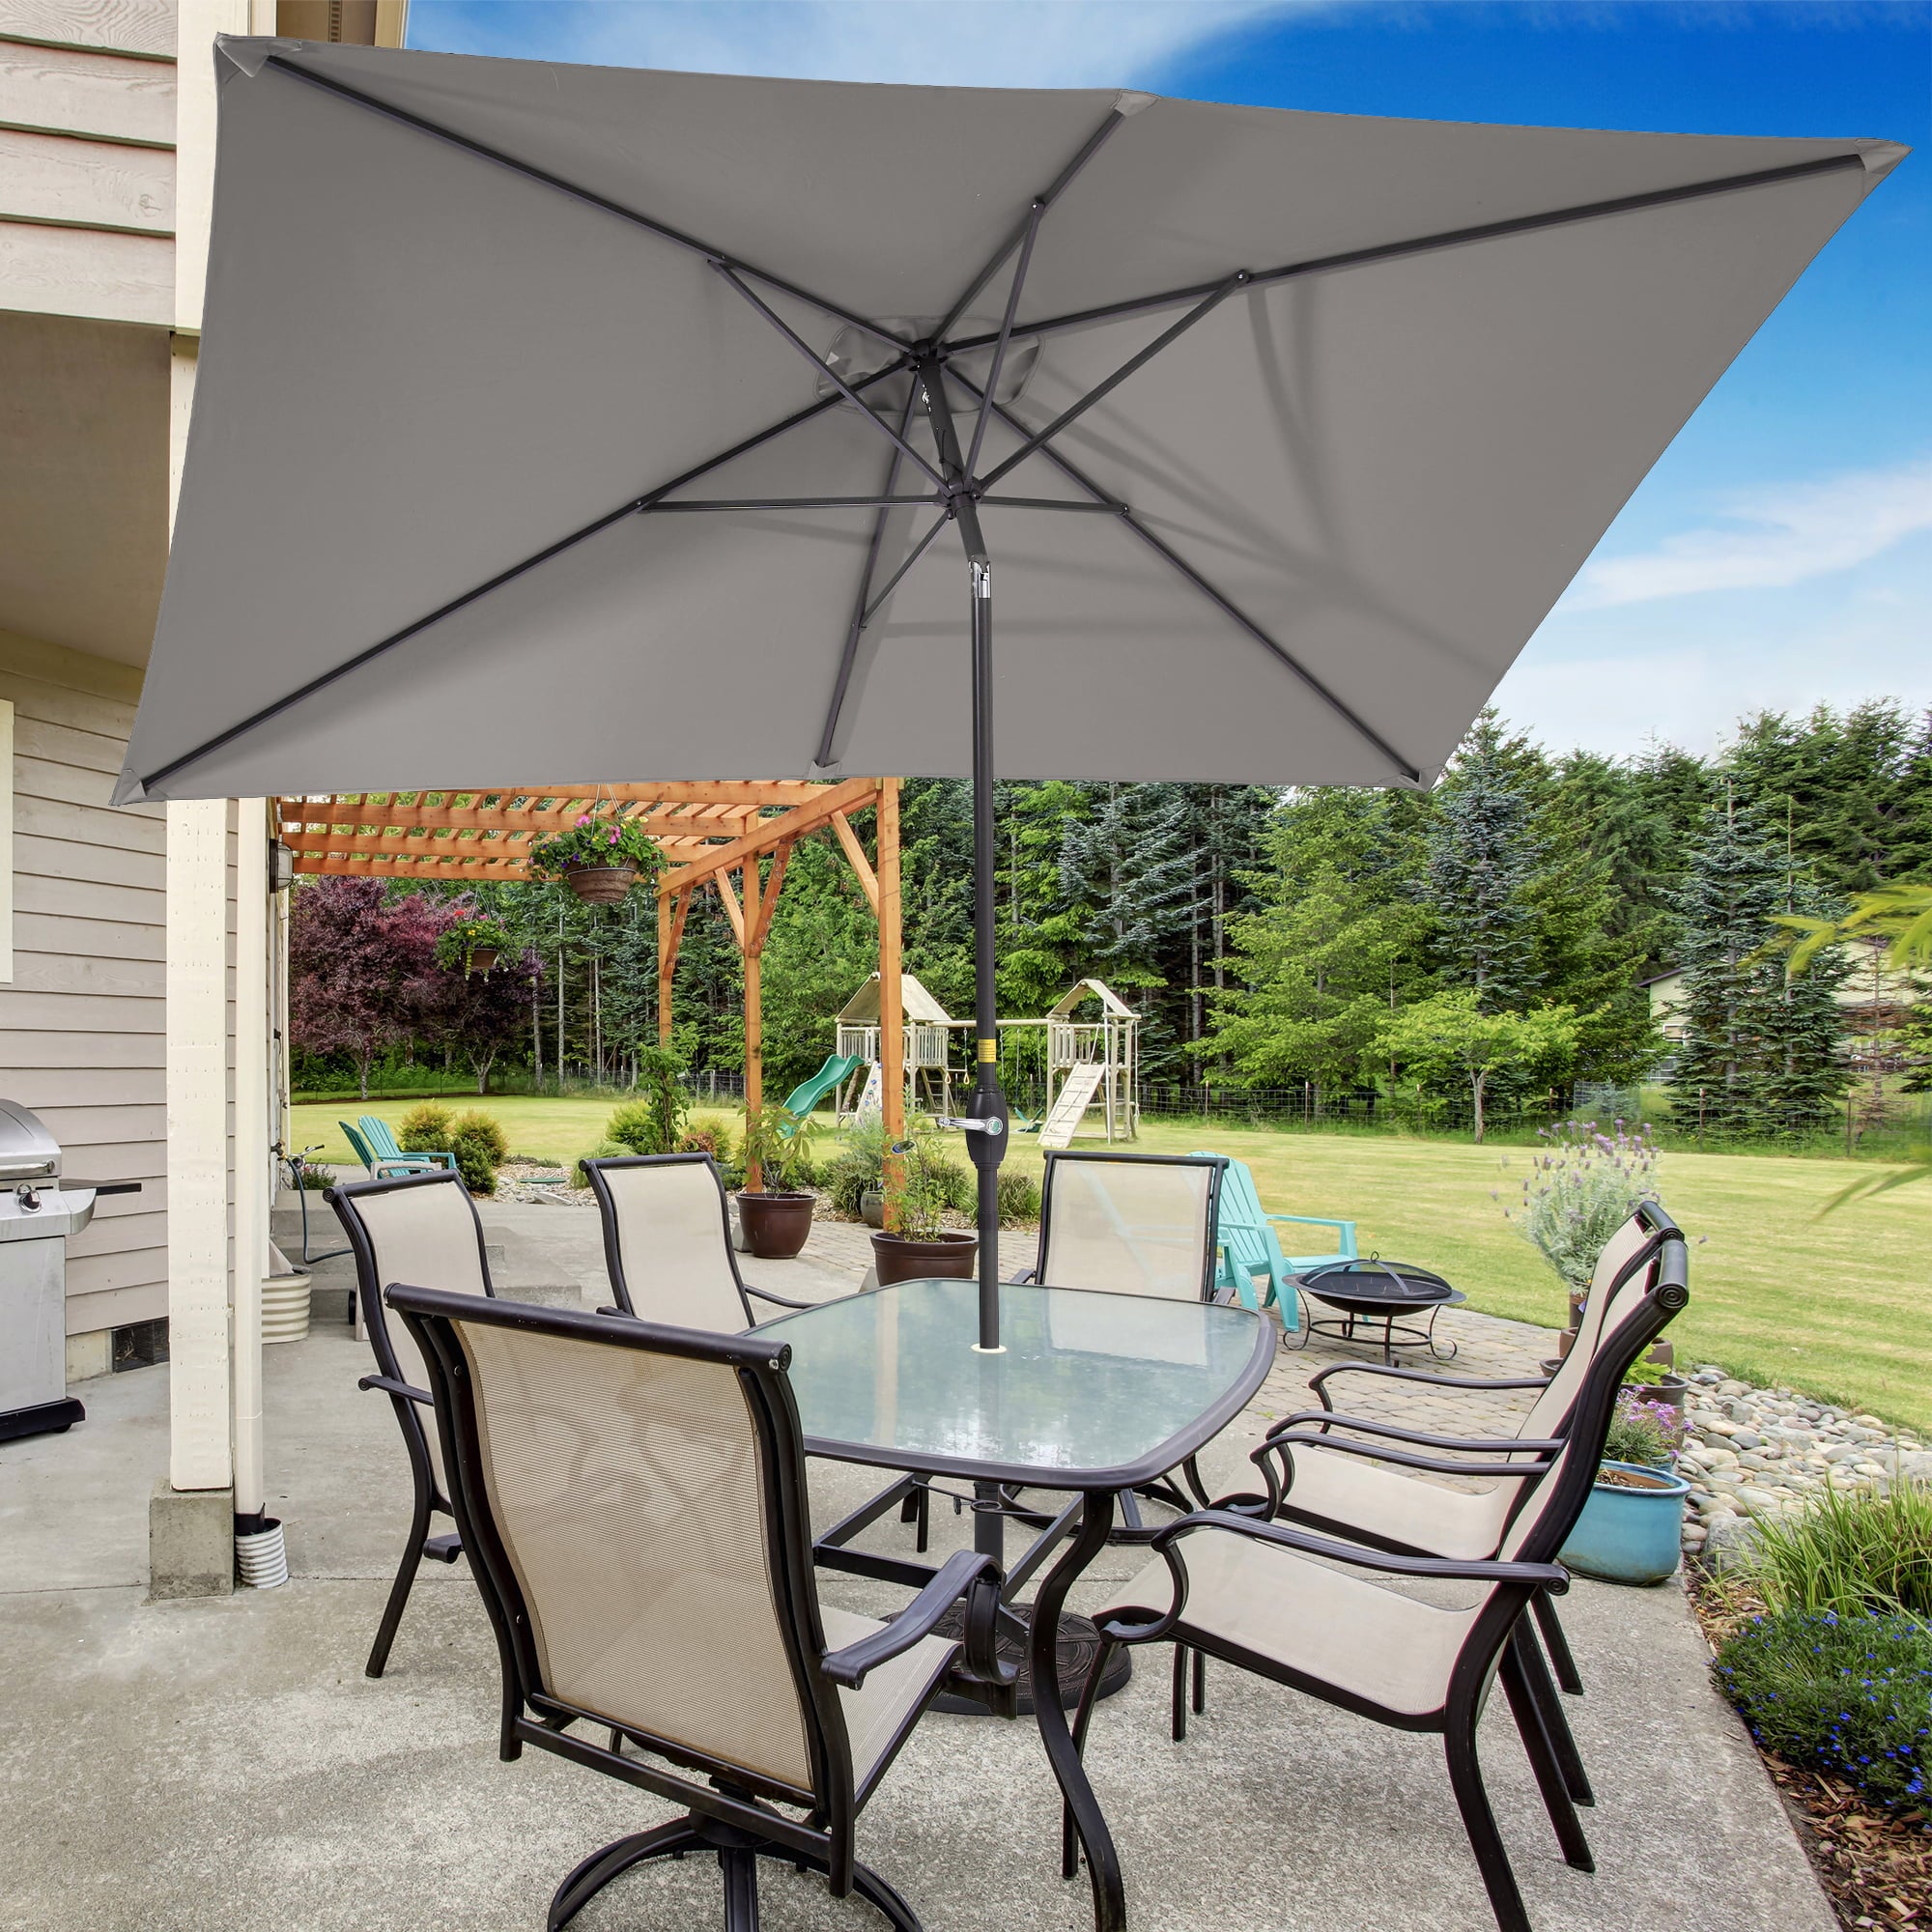 CHYVARY 10 x 7 FT Outdoor Patio Rectangle Market Umbrellas, Aluminum Frame Table Umbrella for Patio, Deck and Pool,Gray